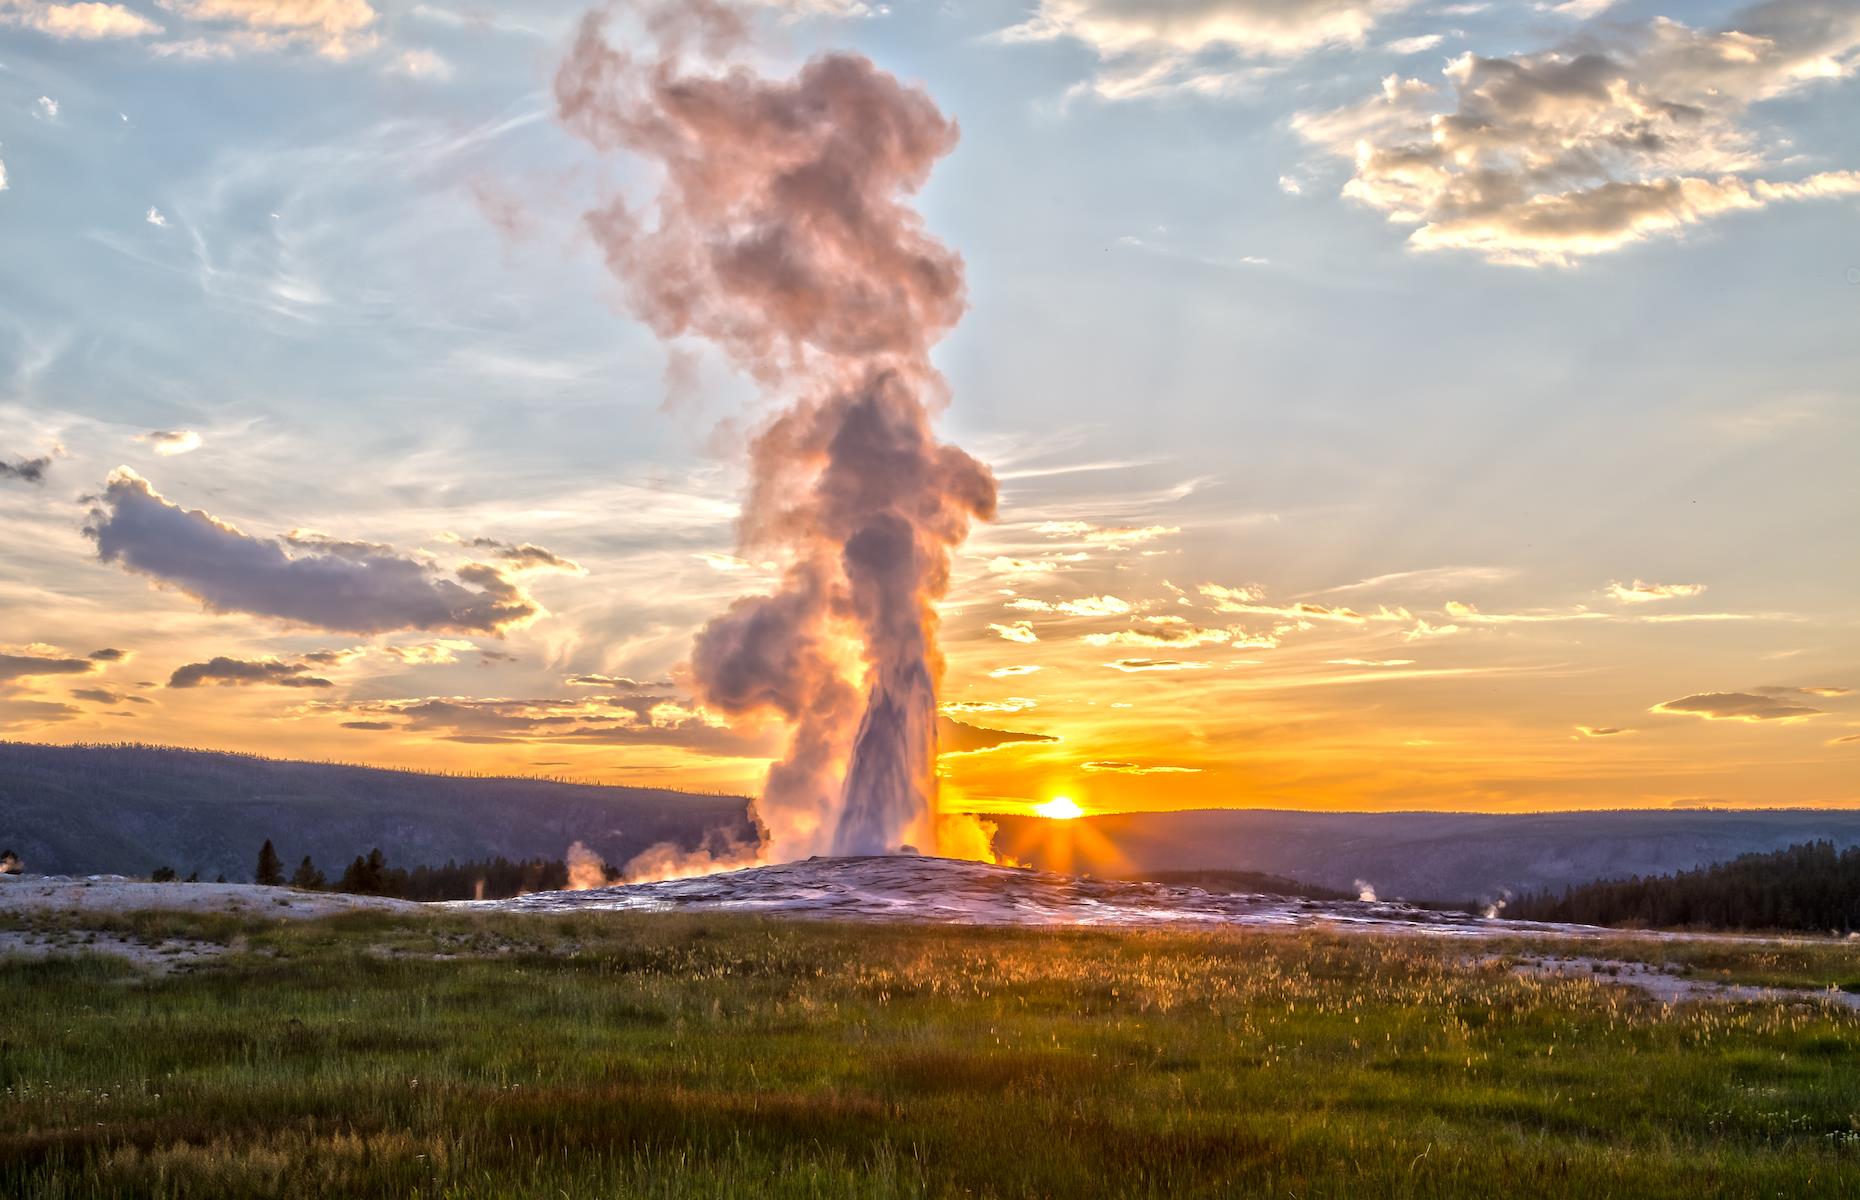 <p>On 1 March 1872, Yellowstone became the world’s first ever national park during the presidency of Ulysses S Grant in order to protect the extraordinary landscape. There are many more record-breaking things about this vast wilderness, which spreads 3,472 square miles (8,992sq/km) across Wyoming, Montana and Idaho. It has 10,000 hydrothermal features – more than the rest of the world combined. It's home to 67 mammal species and has the largest concentration of wildlife in the country’s lower 48 states. The park is especially famed for its bison and is also the only place in the US where these bulky beasts have lived continuously since prehistoric times.</p>  <p><a href="https://www.loveexploring.com/galleries/135655/surprising-us-national-park-facts-you-probably-didnt-know?page=1"><strong>Surprising facts about America's national parks</strong></a></p>